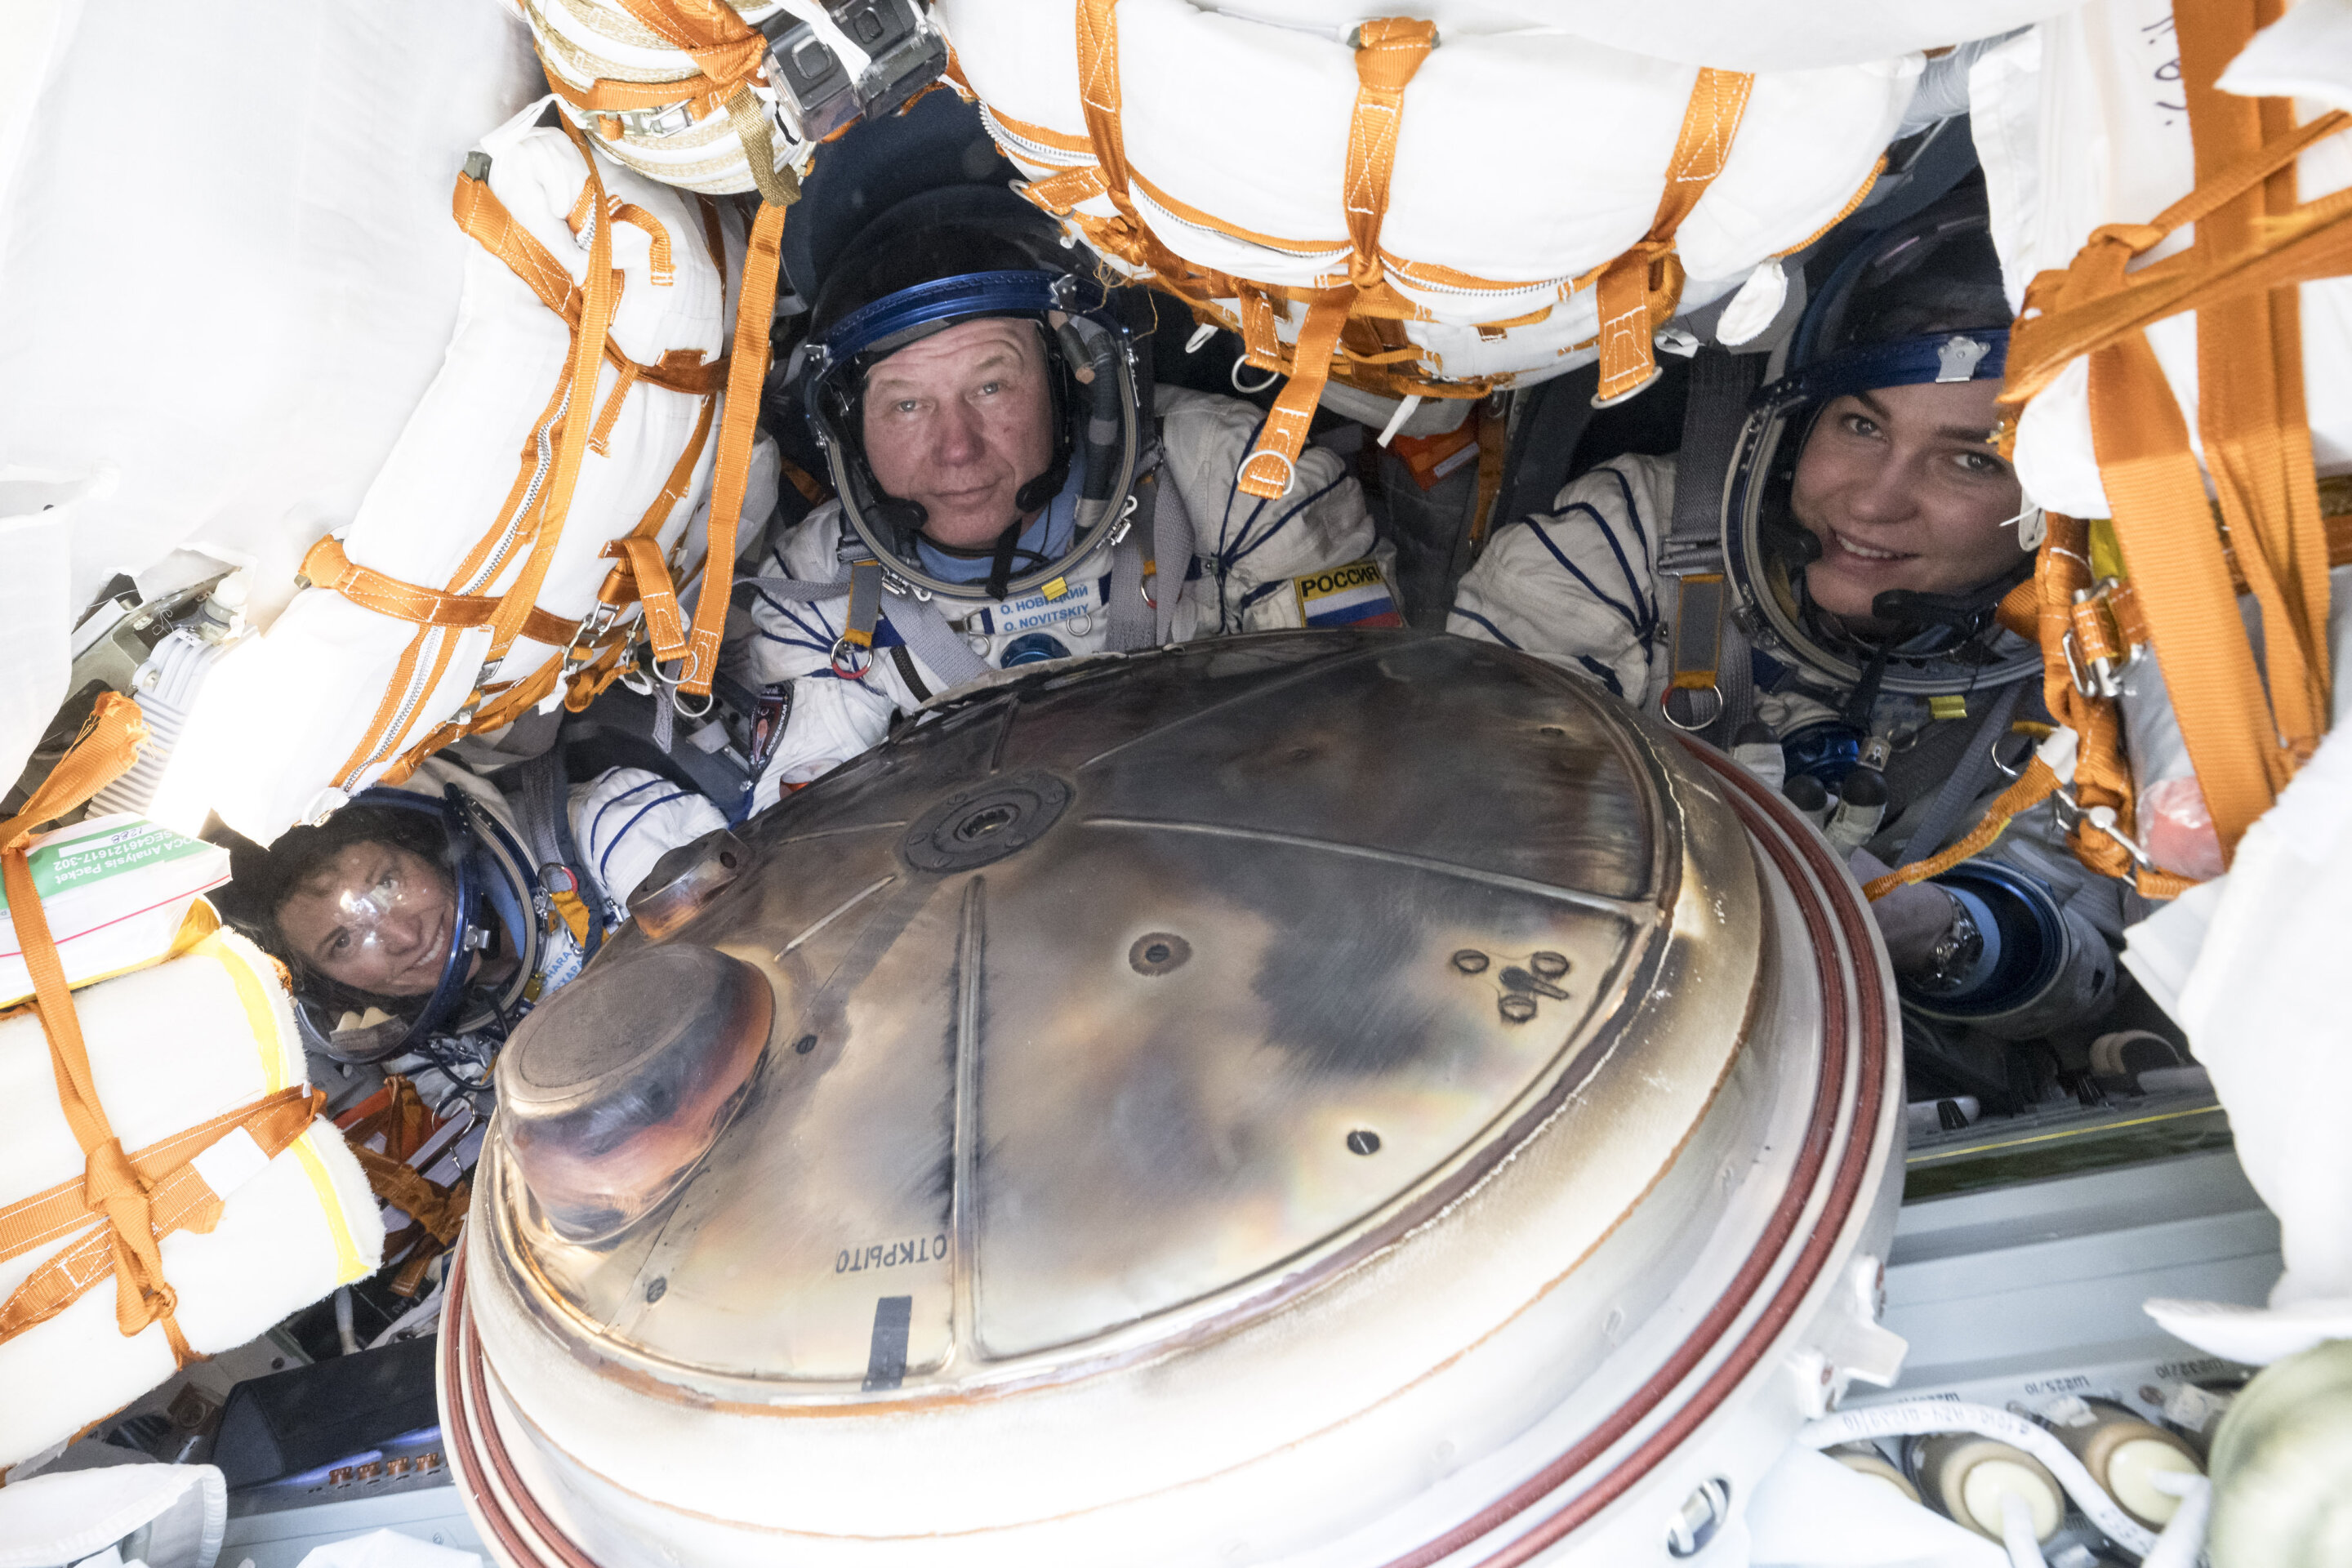 #A Soyuz capsule carrying 3 crew from the International Space Station lands safely in Kazakhstan